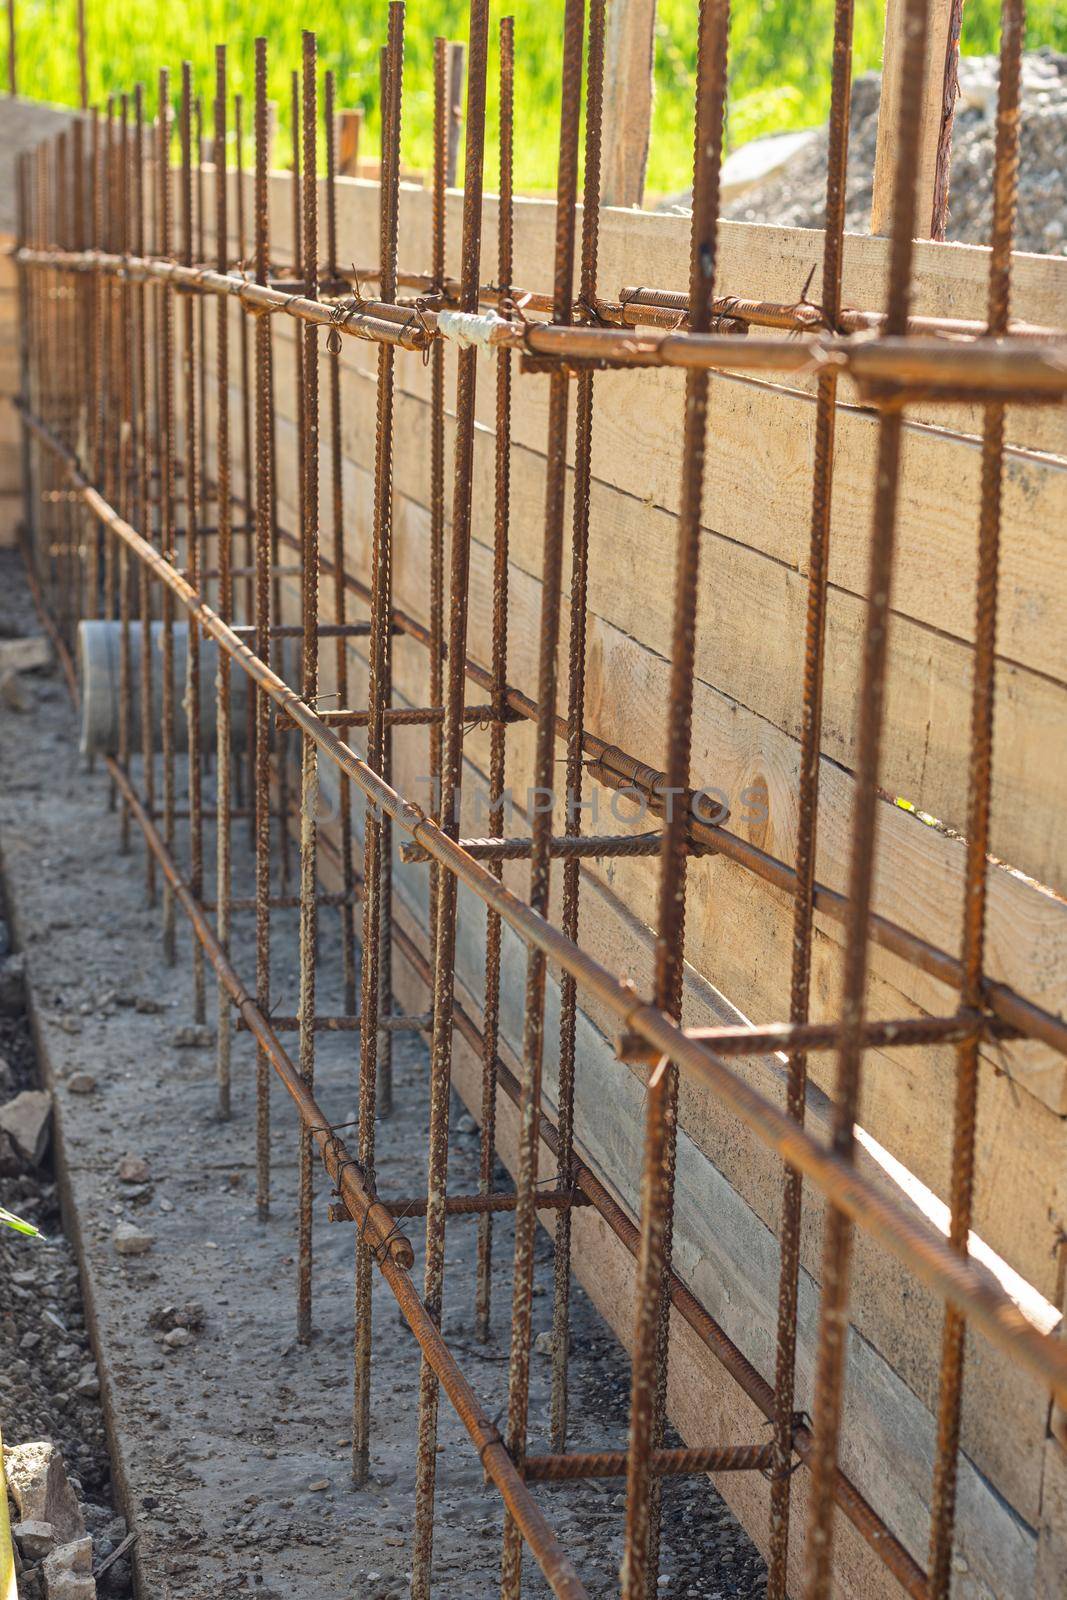 Construction of a strip foundation, reinforcement strapping, formwork in the background a